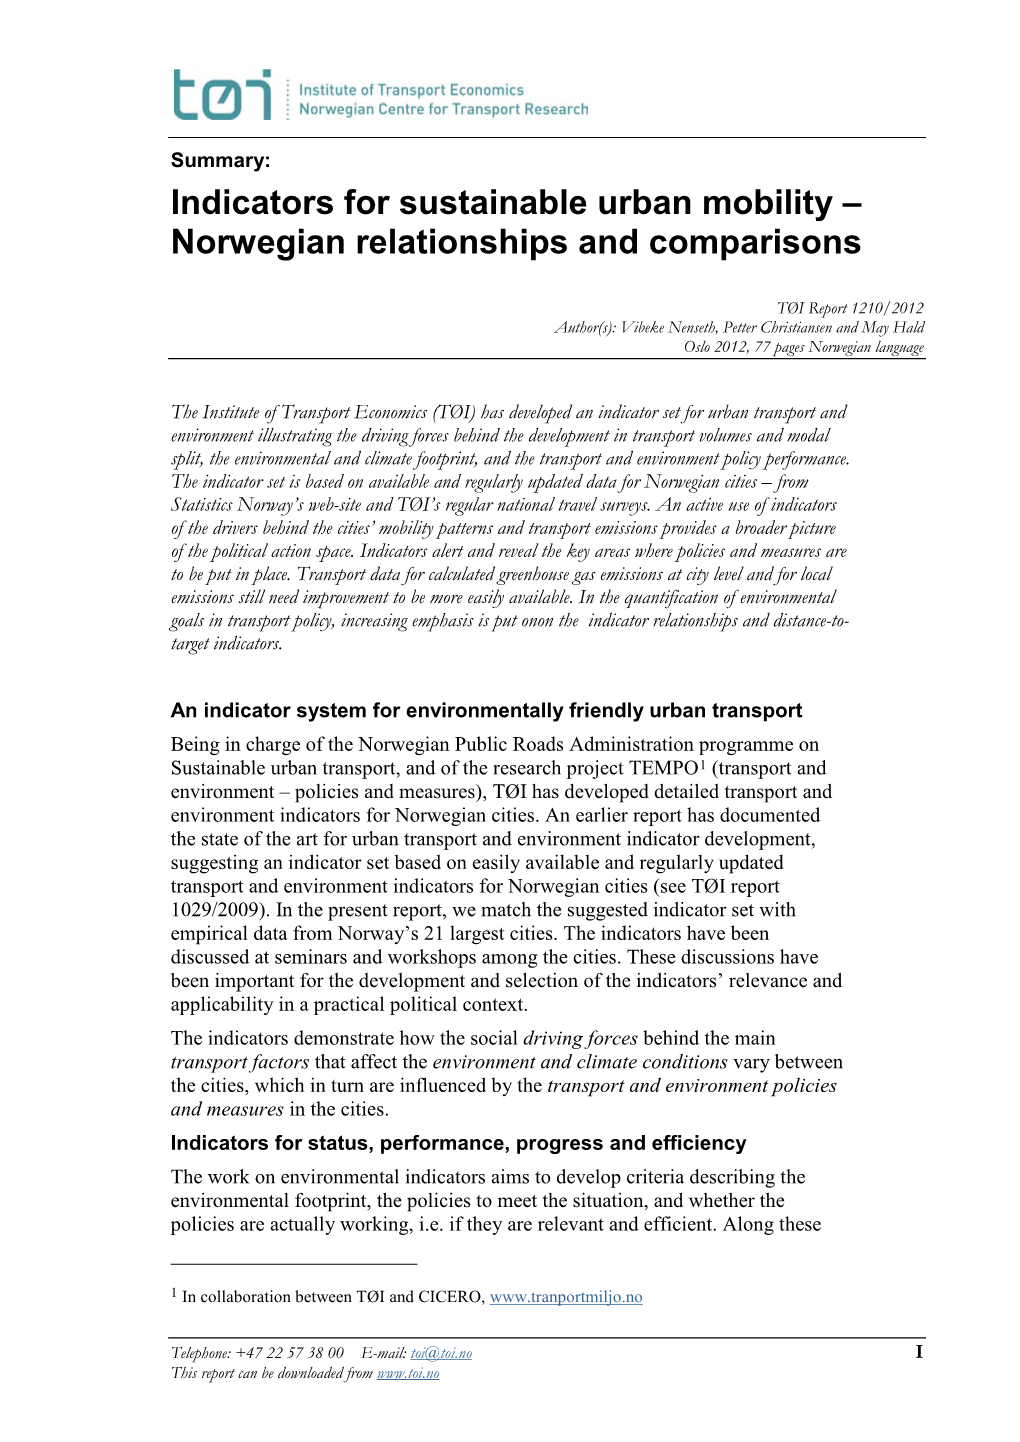 Indicators for Sustainable Urban Mobility – Norwegian Relationships and Comparisons